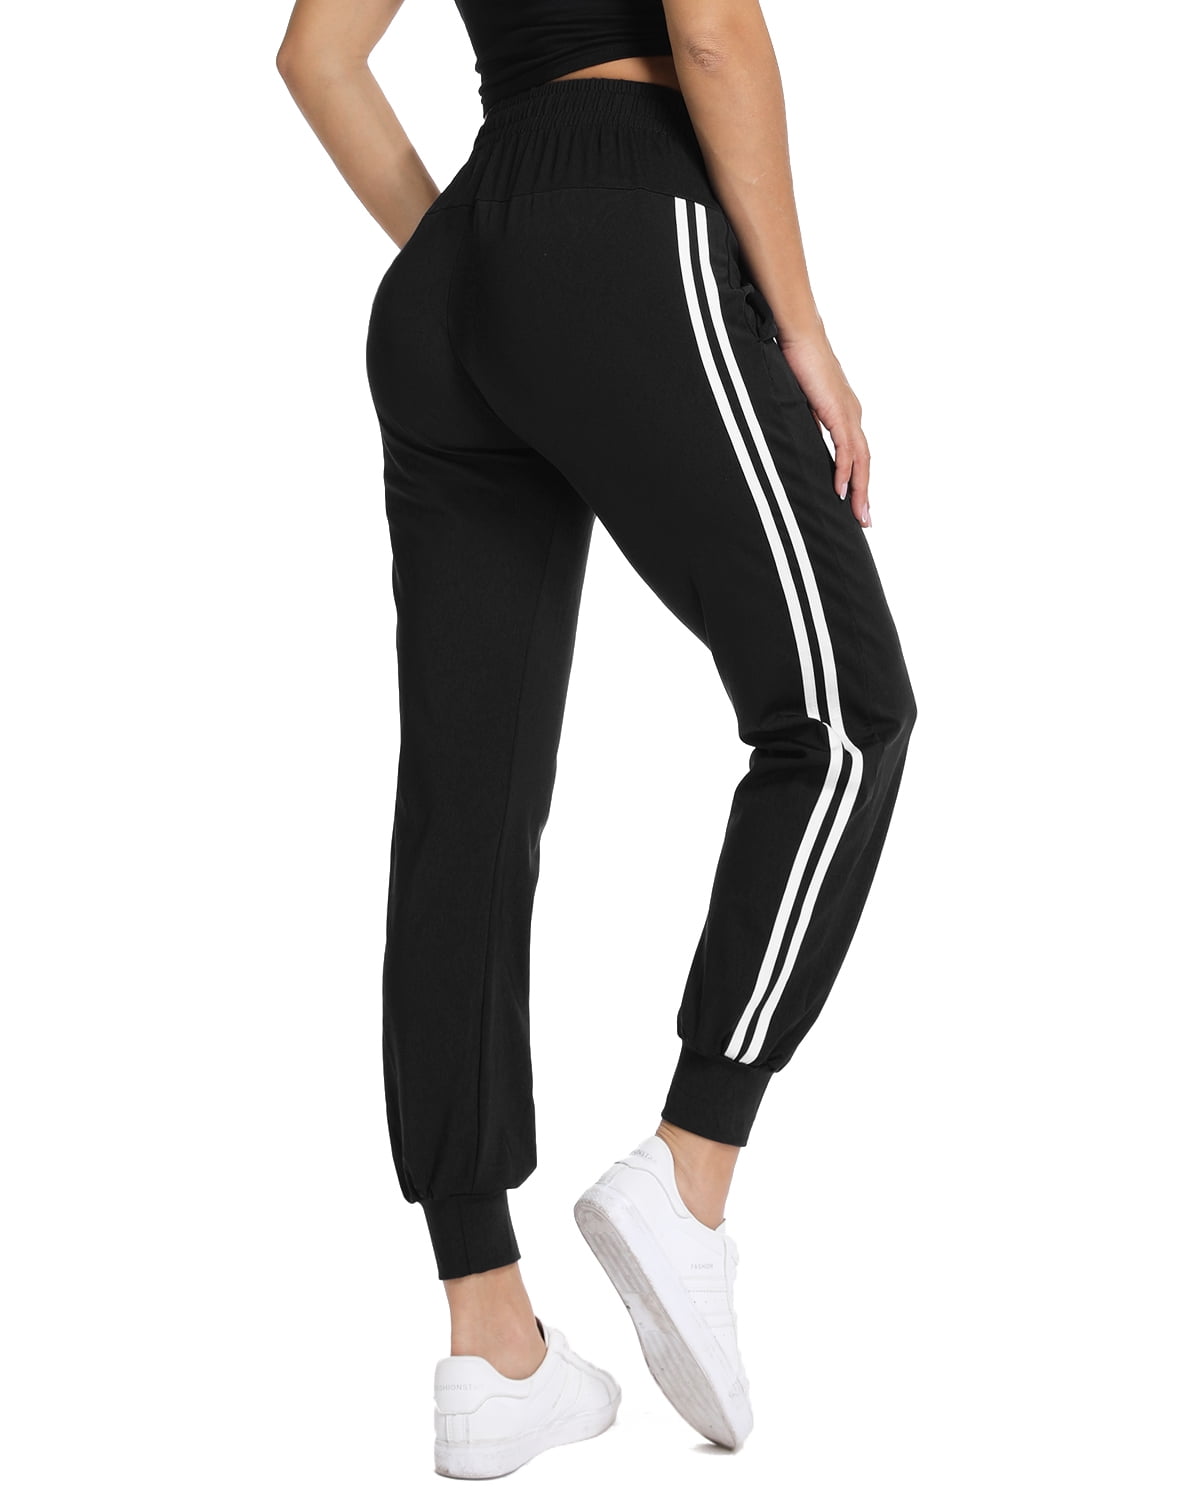 Maternity Sports Pants Drawstring Workout Casual Track Pants with Pockets Black M